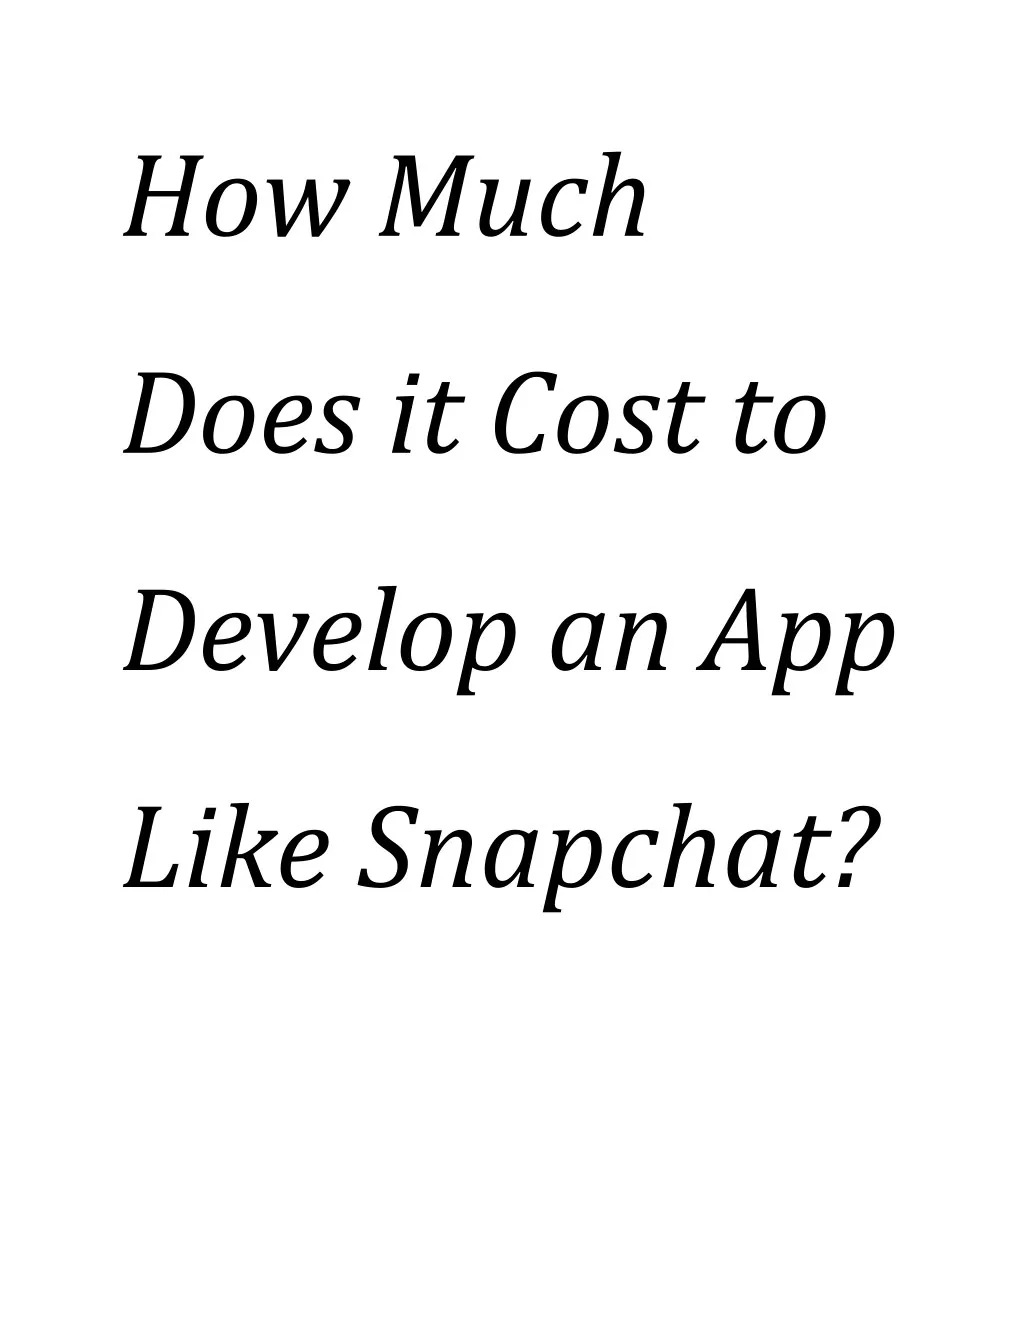 how much does it cost to develop an app like